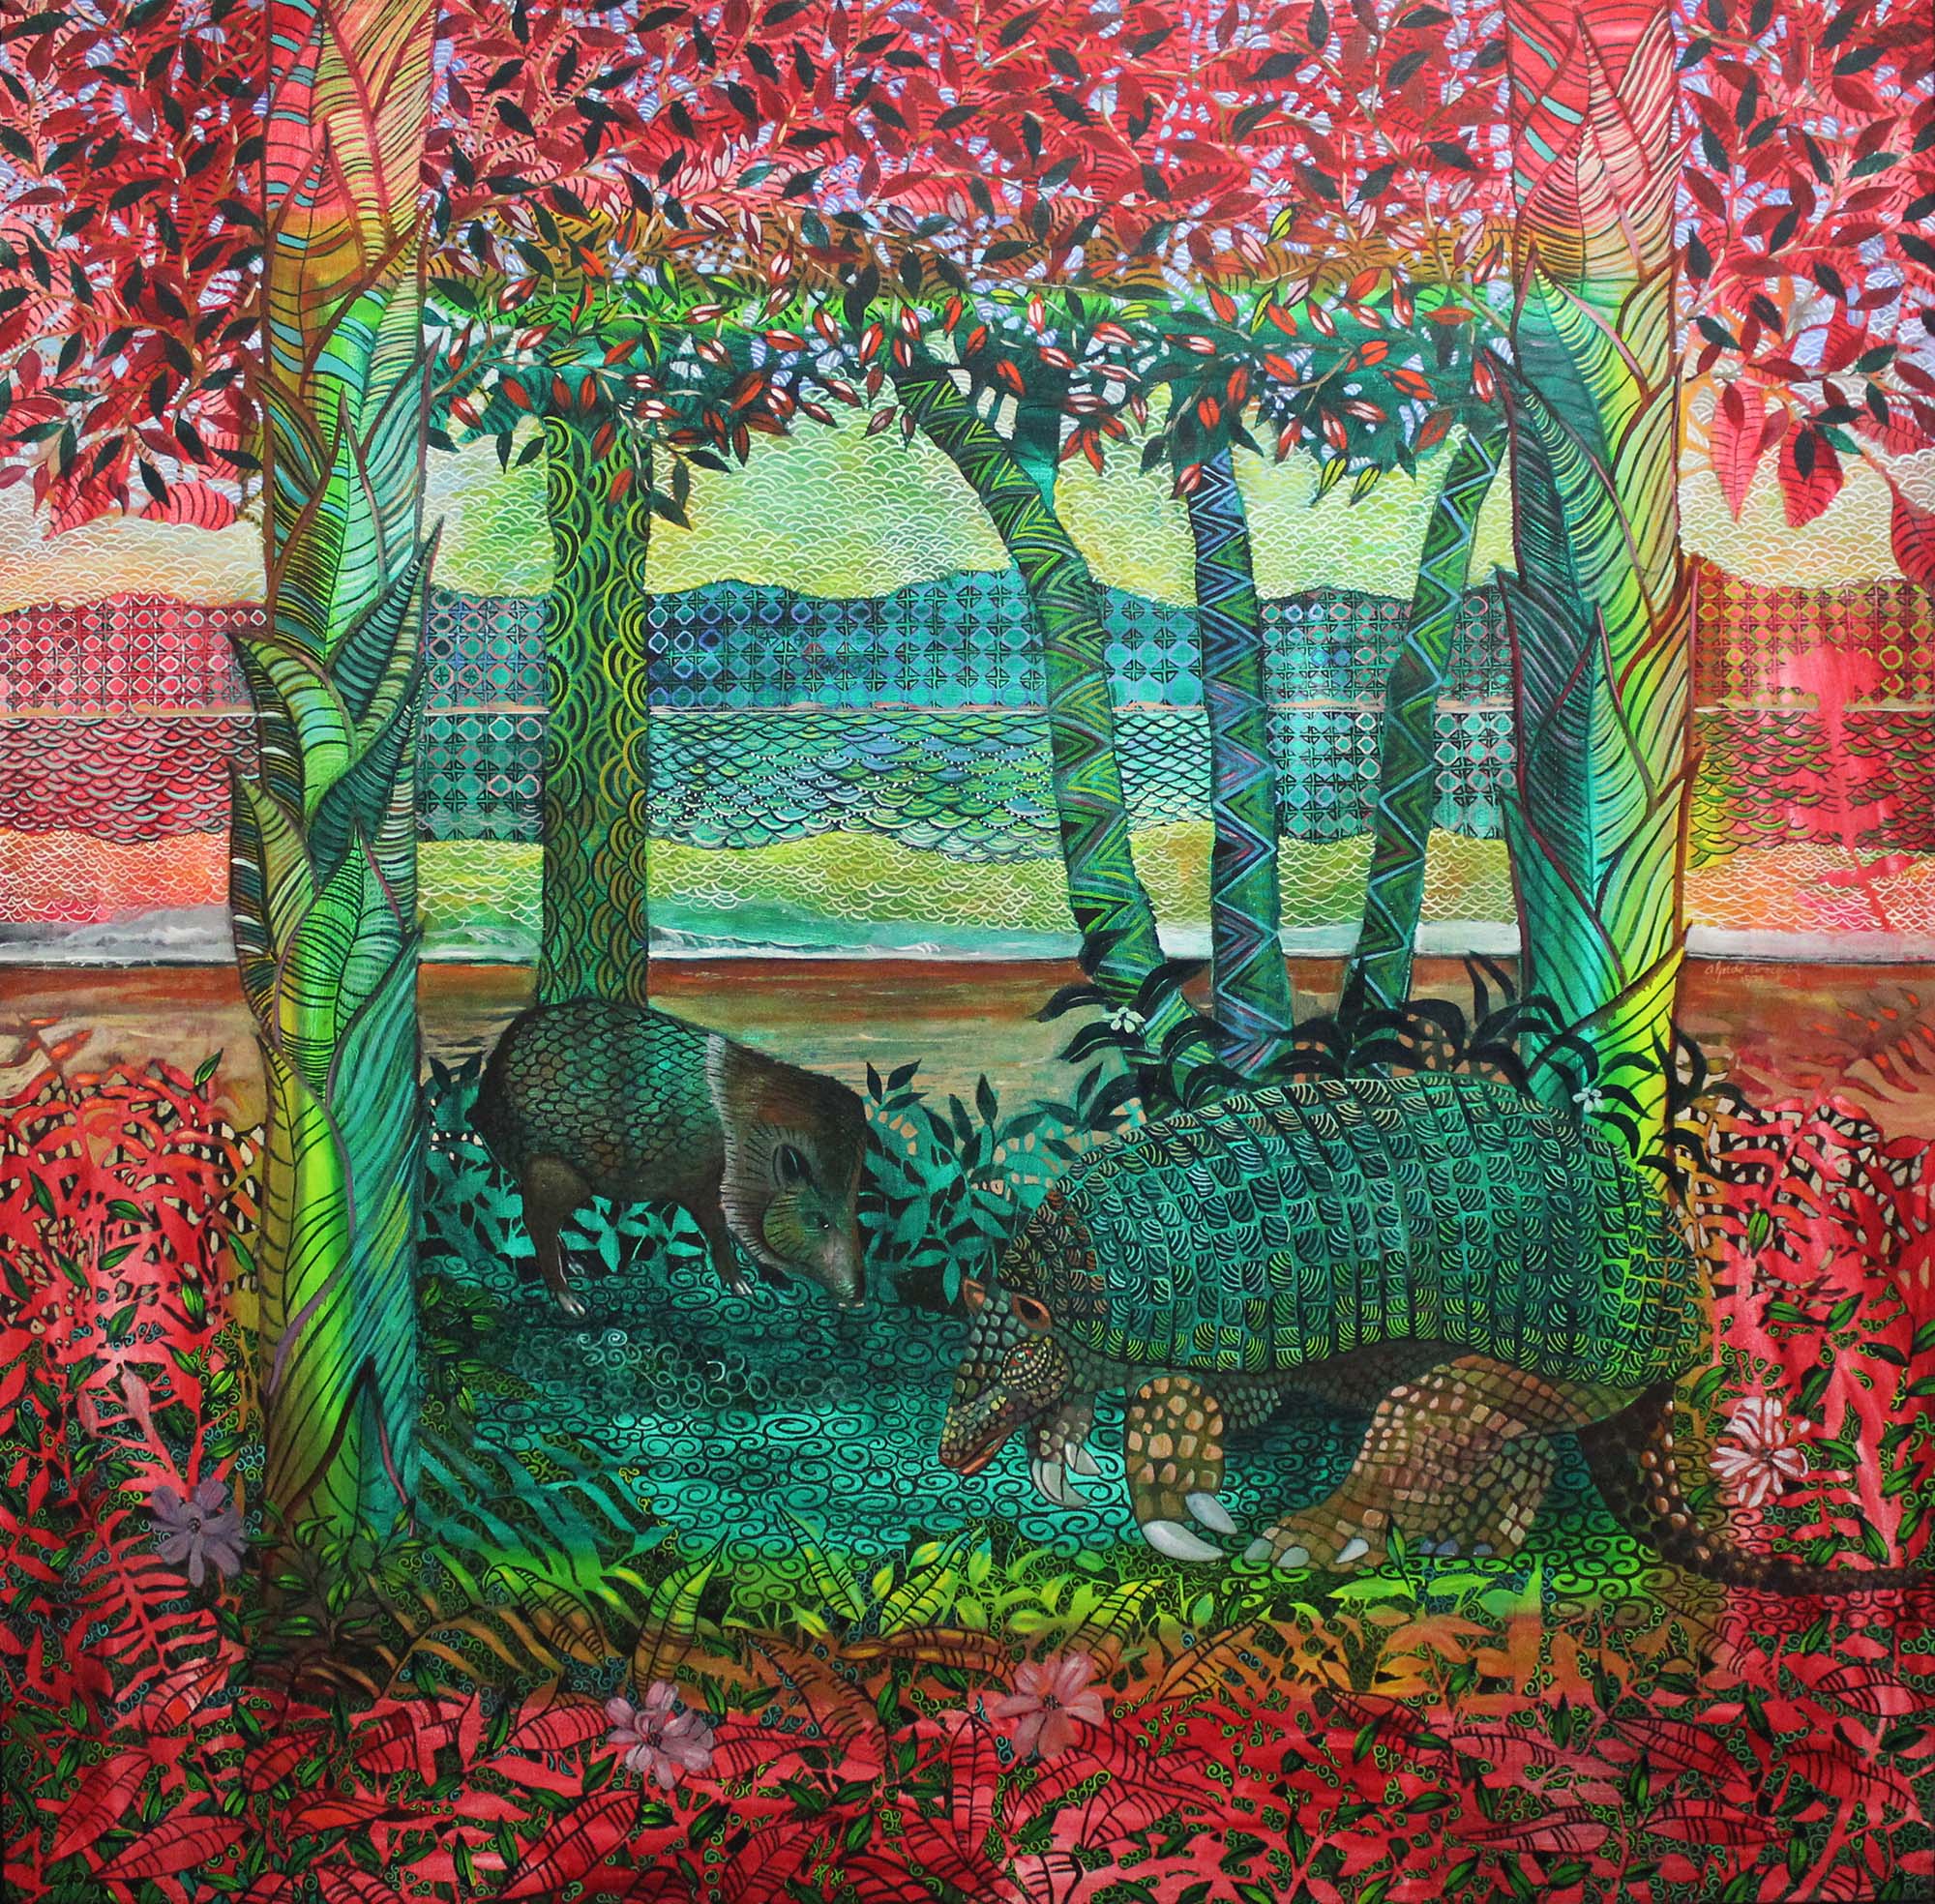 brightly colored red and green landscape with scintillating scaly creatures in the foreground.